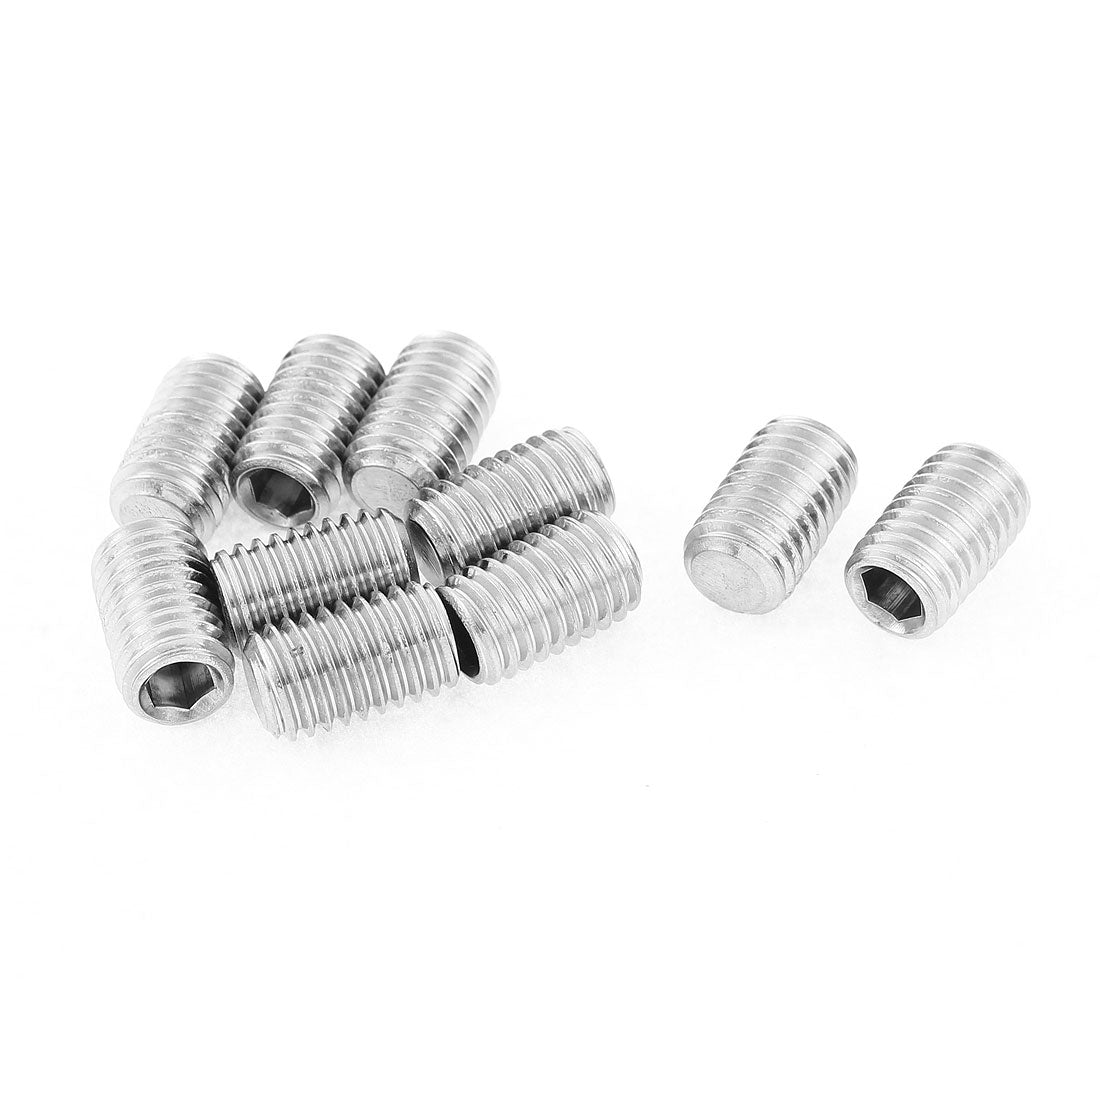 uxcell Uxcell M10x16mm 1.5mm Pitch Stainless Steel Hex Socket Set Flat Point Grub Screws 10pcs